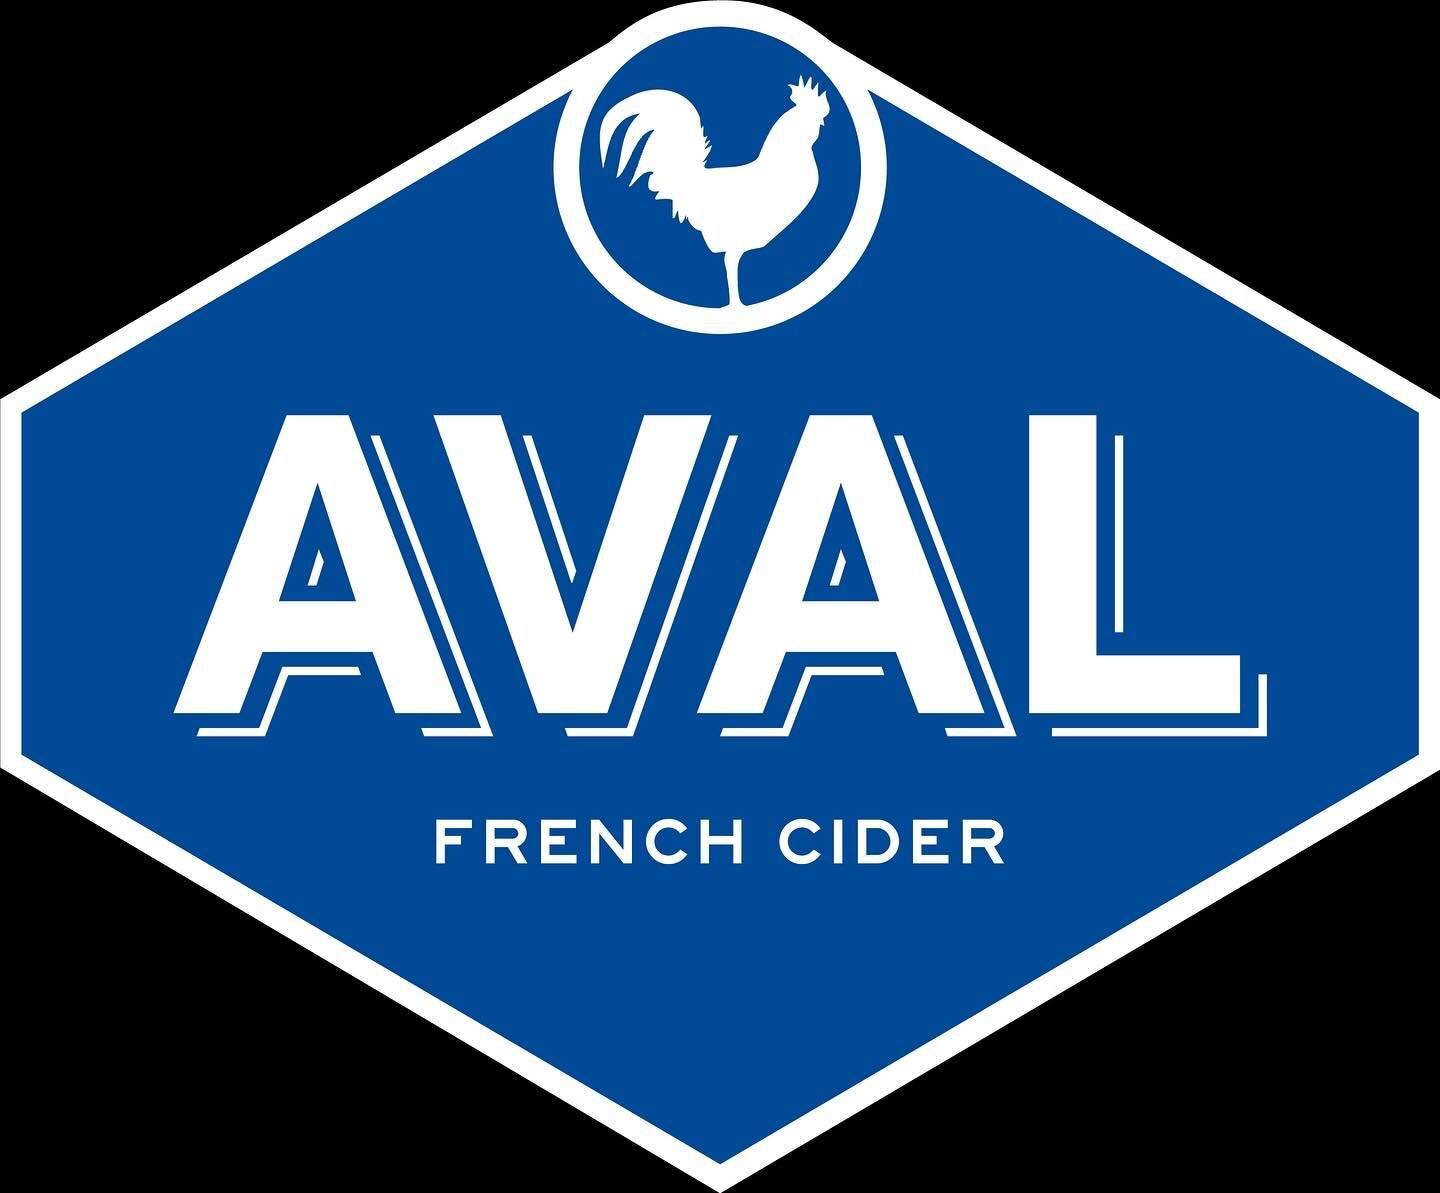 @avalcider, from France&rsquo;s most beautiful region and mecca of cider, Bretagne, is bringing to the world a line of extraordinary ciders. 

With zero added sugars or sweeteners, Aval is the result of natural fermentation of 100% fresh-pressed juic